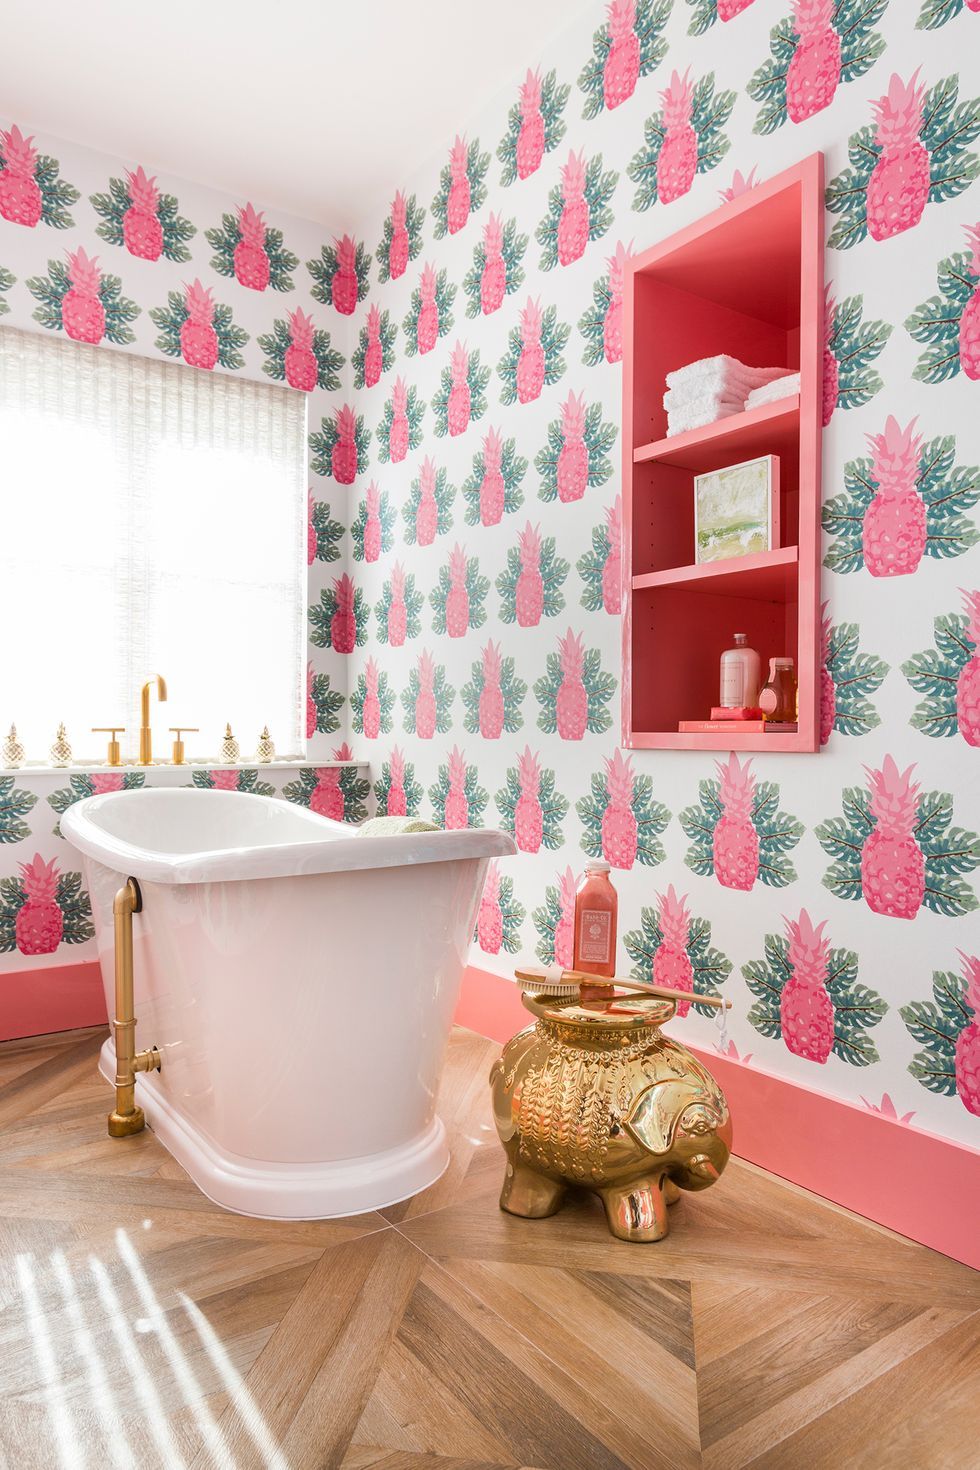 Bathroom wallpaper ideas to add colour and style to a space  Ideal Home